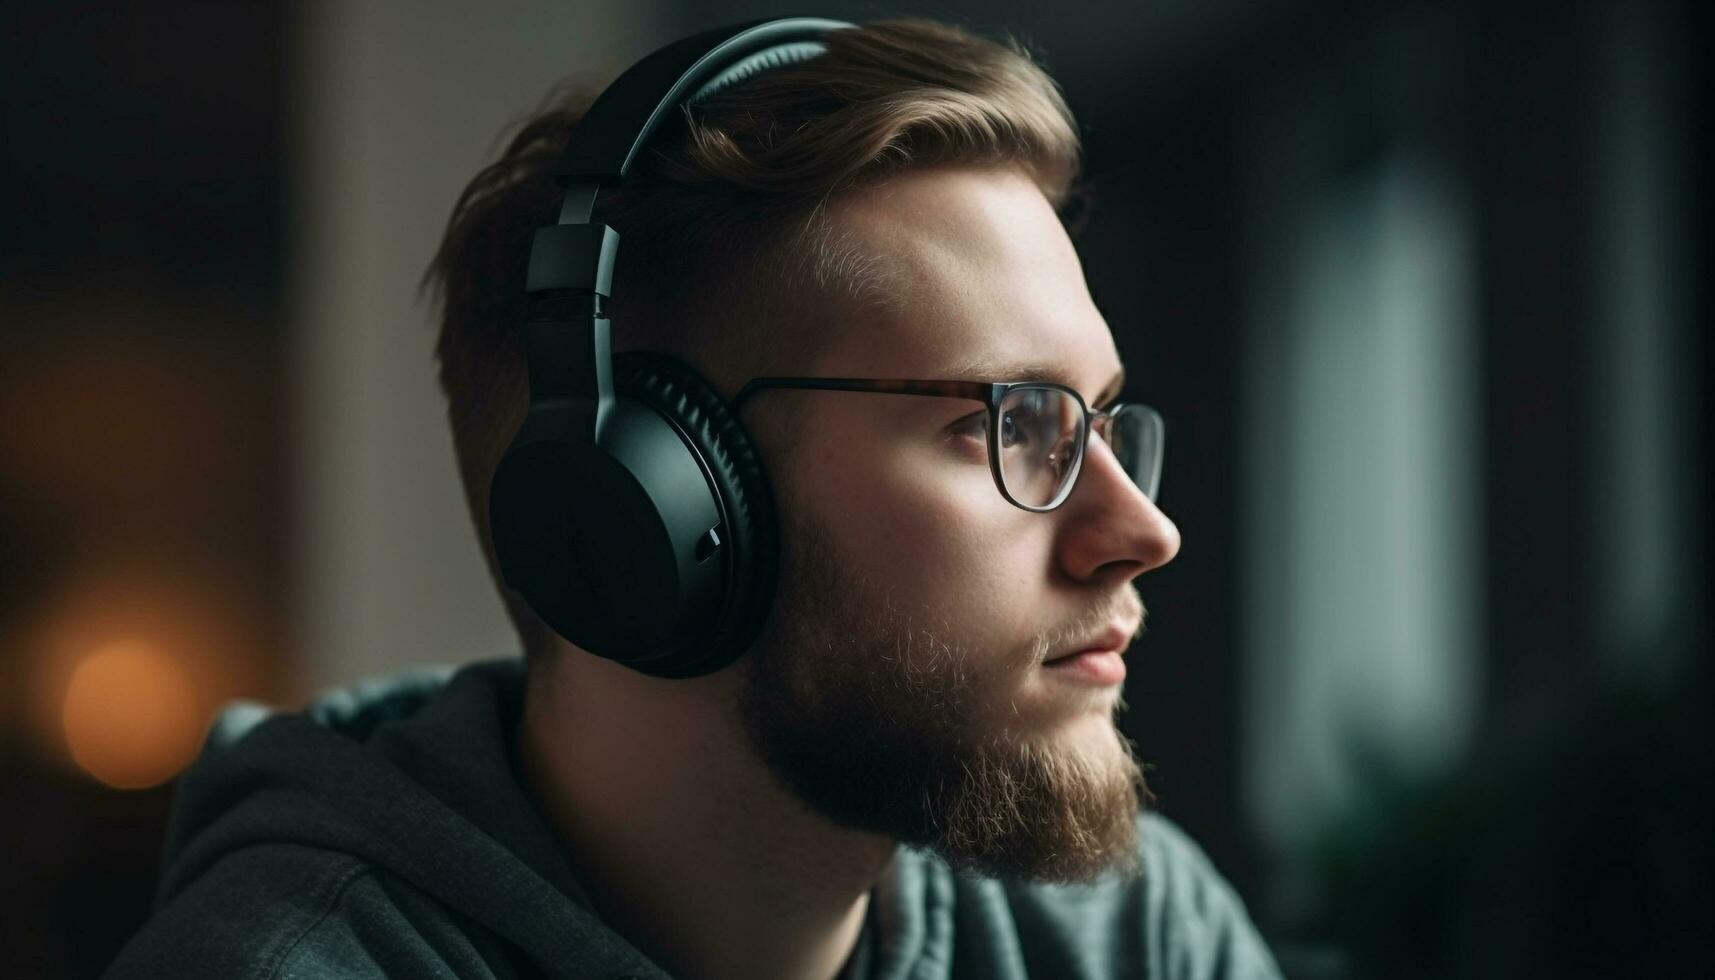 Young adult Caucasian male sitting indoors, wearing casual clothing and eyeglasses, listening to headphones generated by AI photo